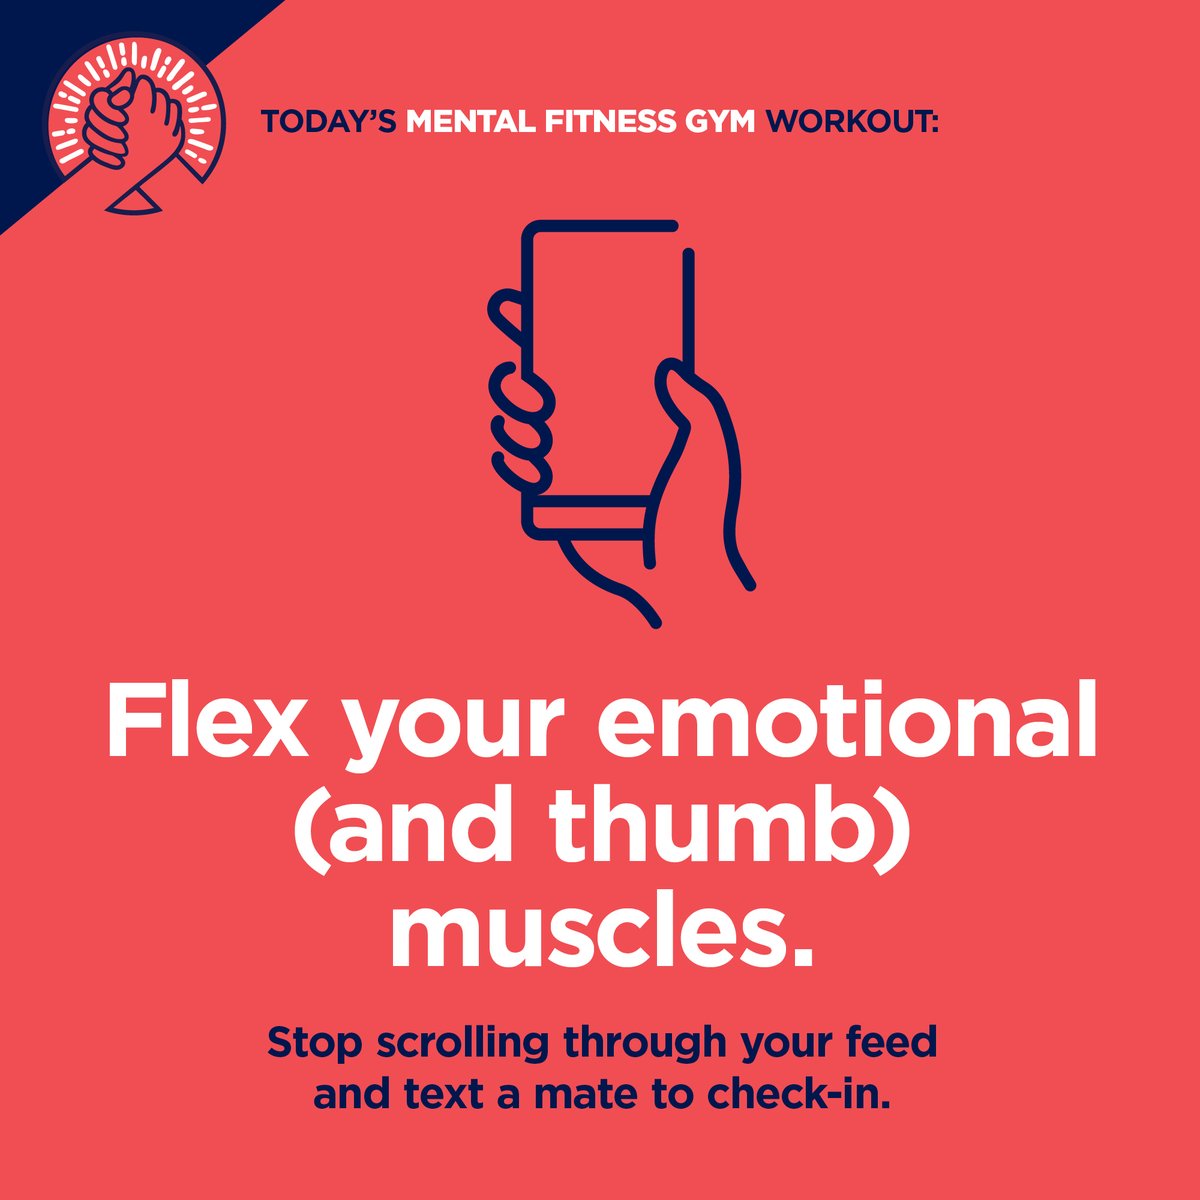 No marathons here - our #mentalfitness exercises are easy, quick and have a big impact on how mentally fit you feel. Each day this week we’re sharing examples of the workouts you can do. Find more workouts like this at thementalfitnessgym.org #mentalfitnessgym #gotcha4life